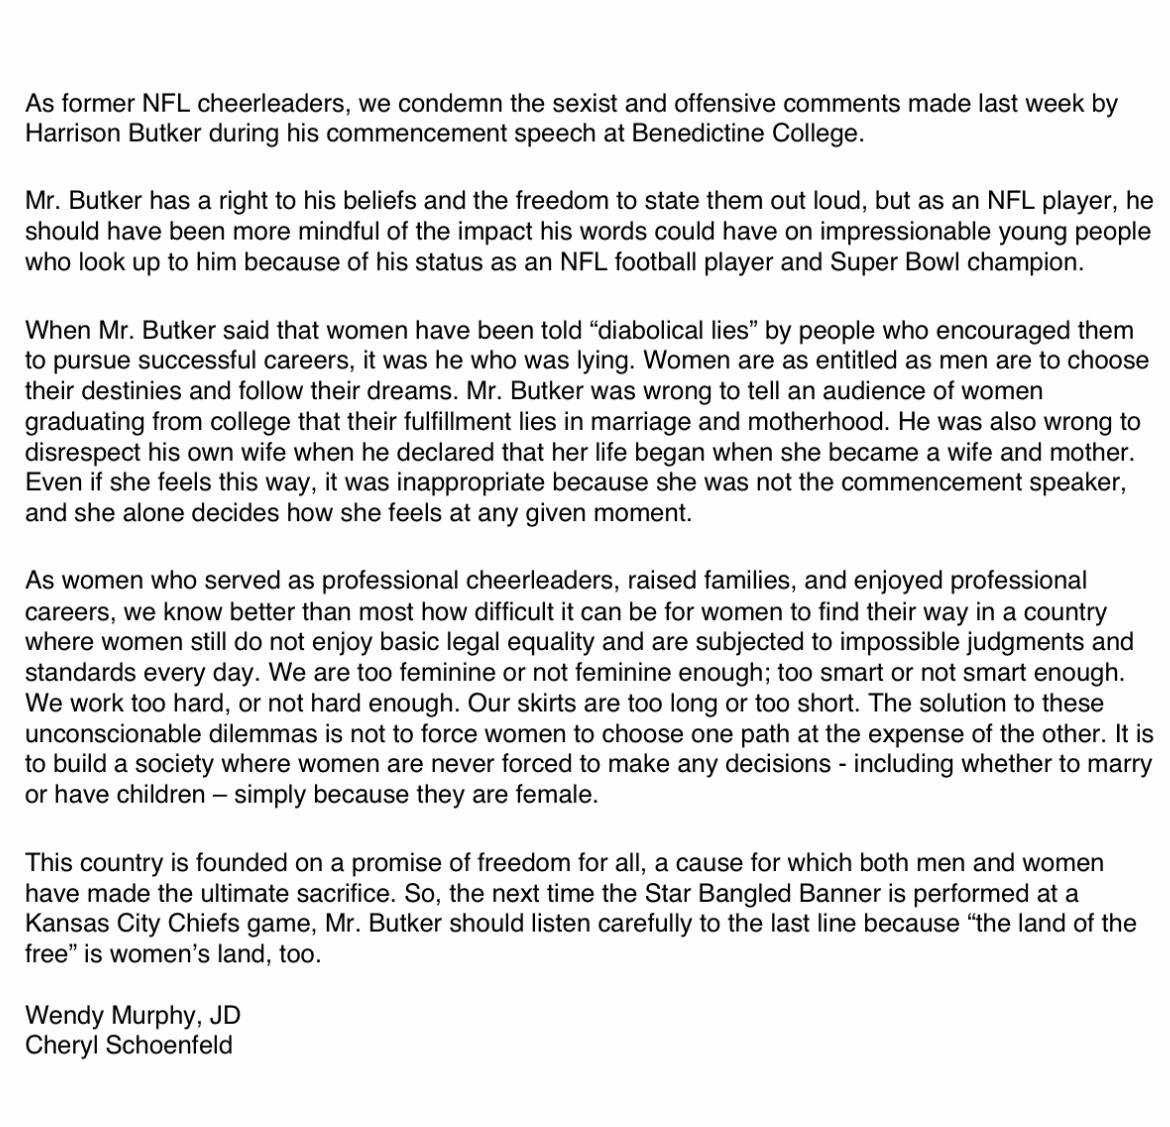 I hope all former & current @NFLCheerAlumni @NFCheerleaders will join me & my colleagues in supporting this letter condemning #HarrisonButker’s recent commencement speech.